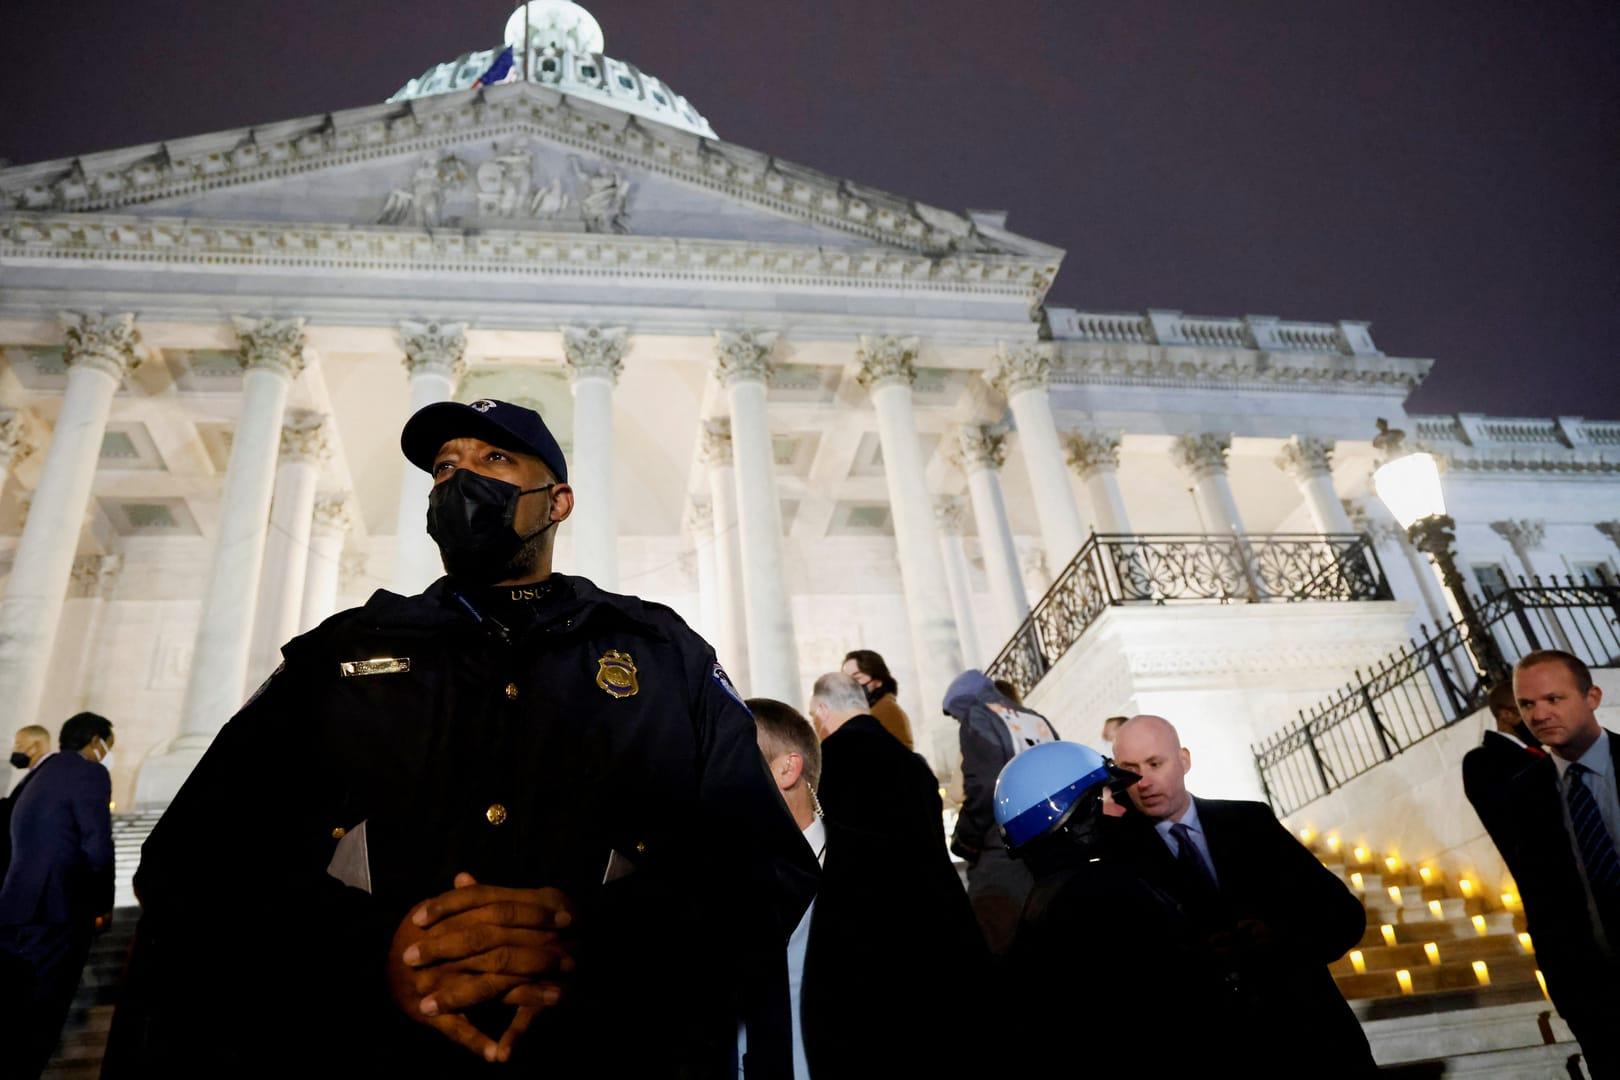 A year after attack on U.S. Capitol and its officers, brokenness lingers